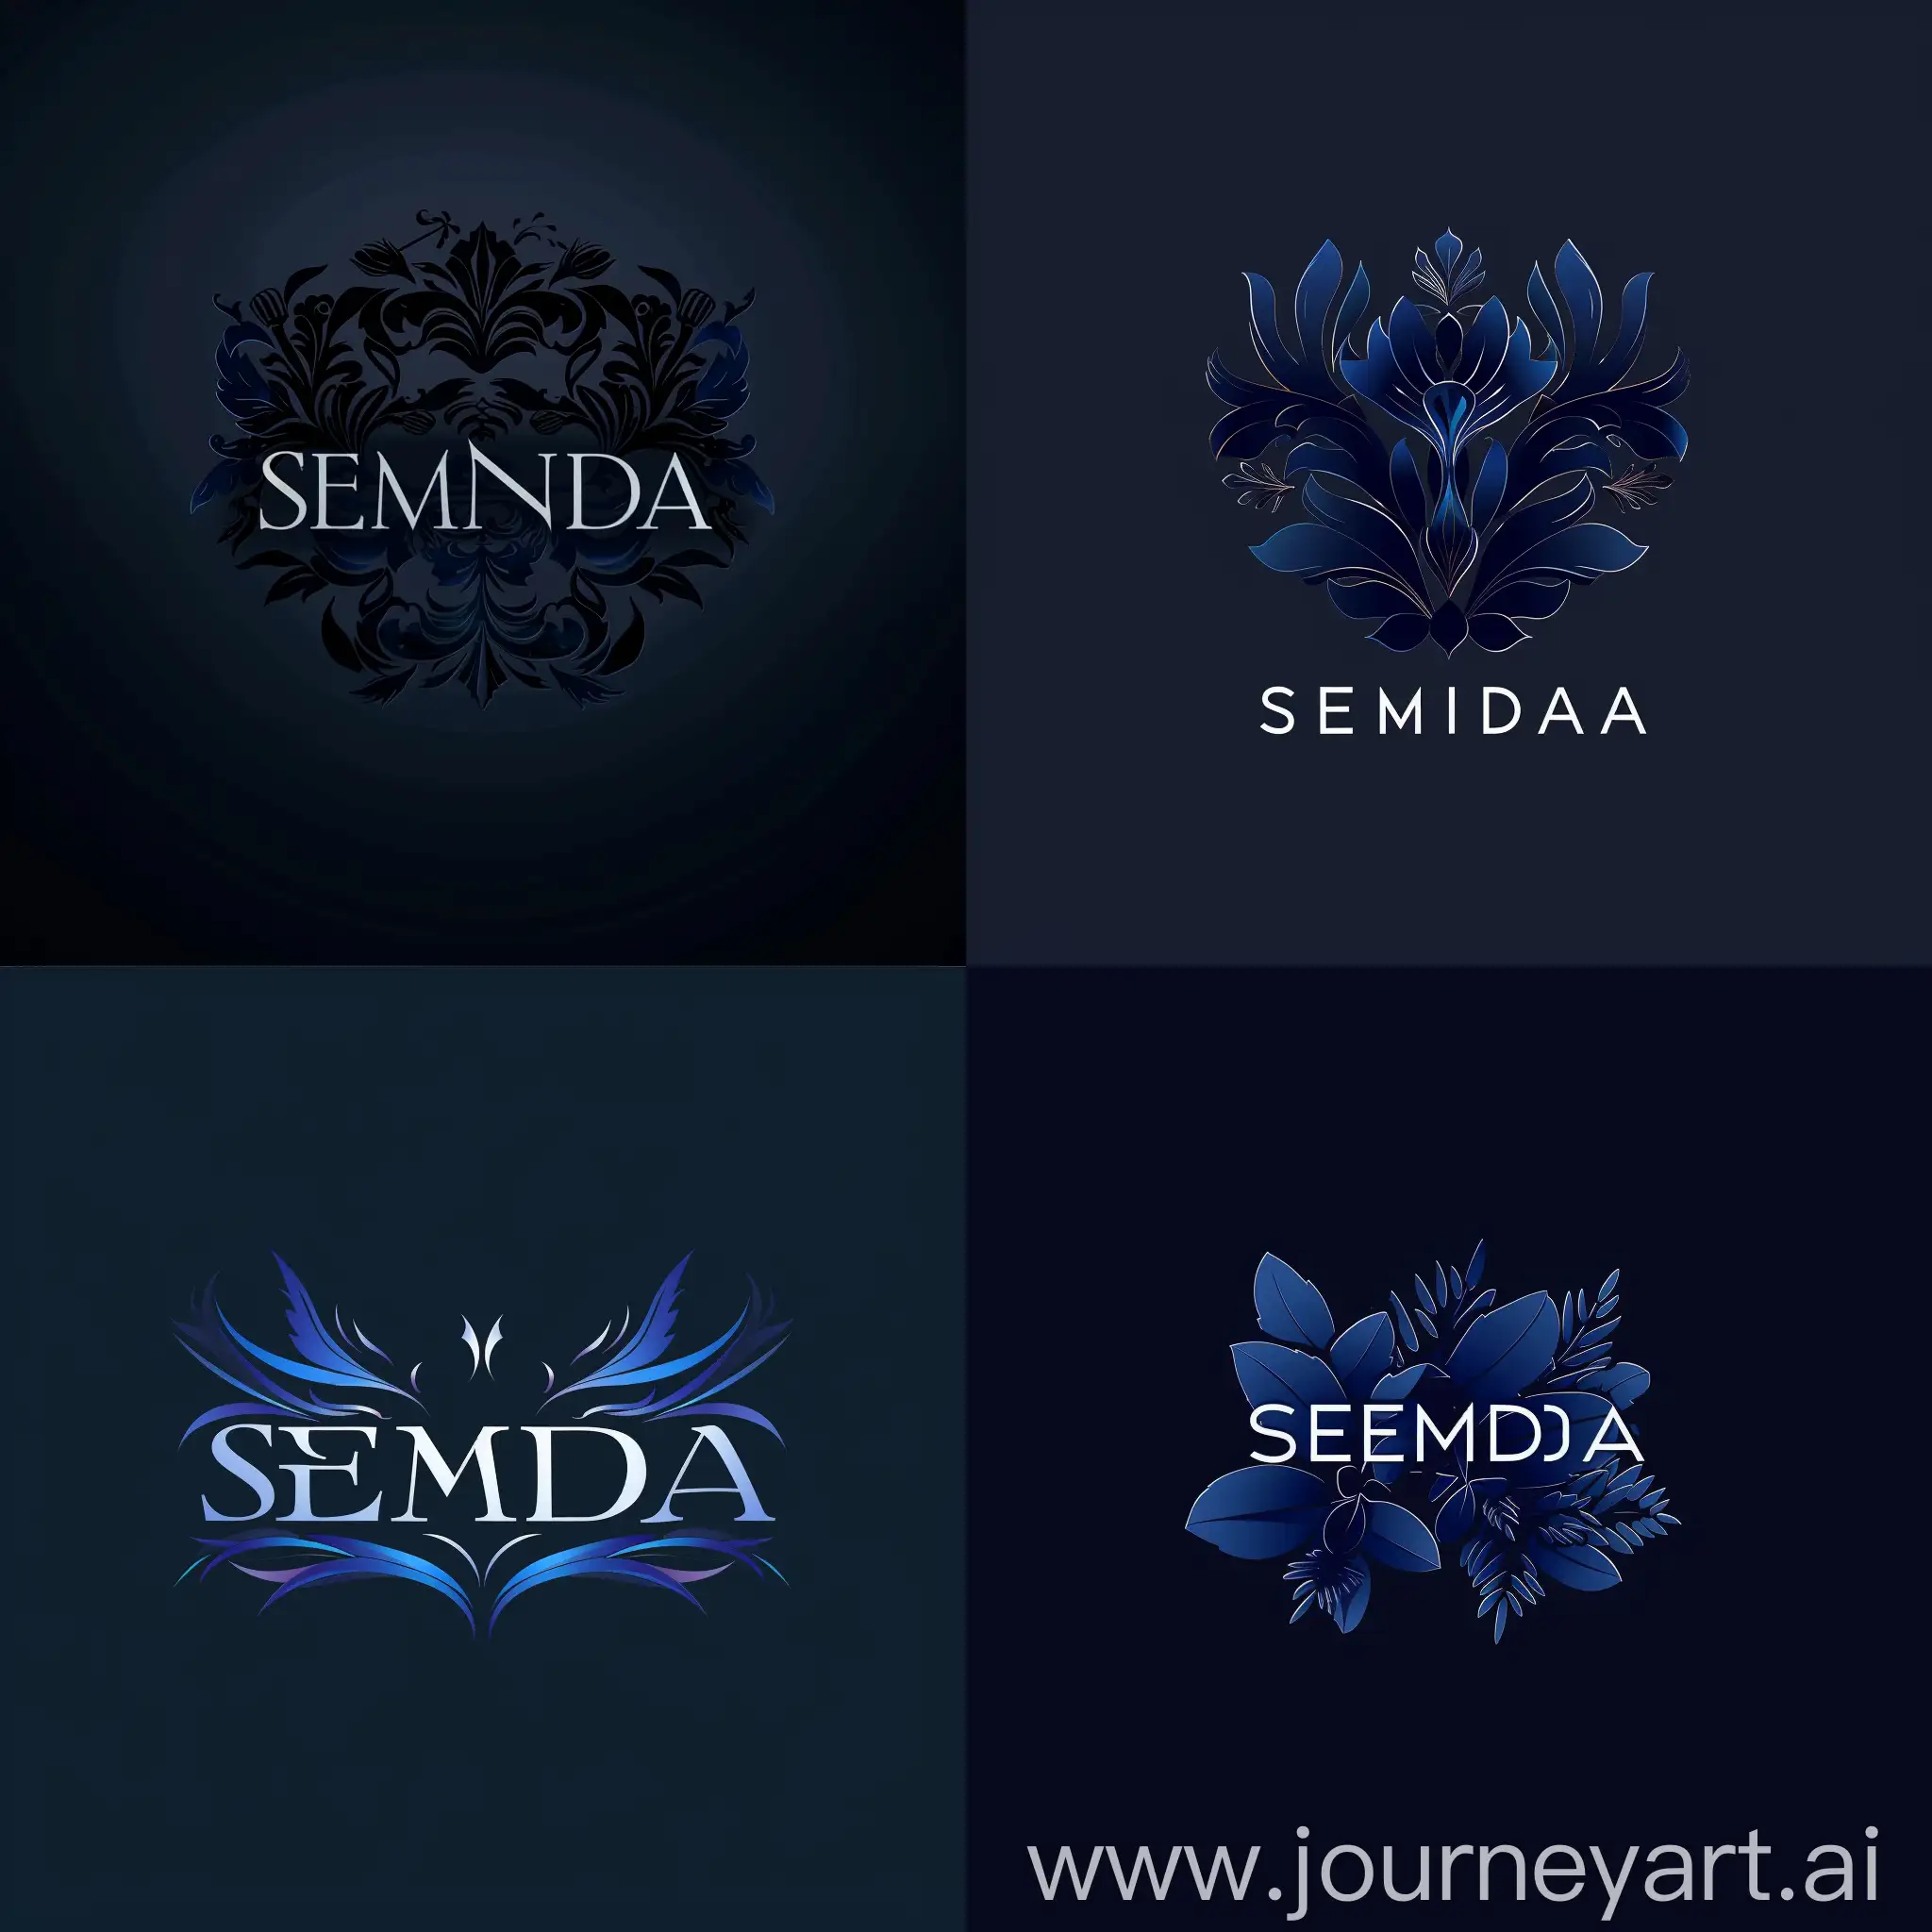 a logo with the words "SEMUDA" in dark blue that is elegant and dashing with the concept of games, films and comics